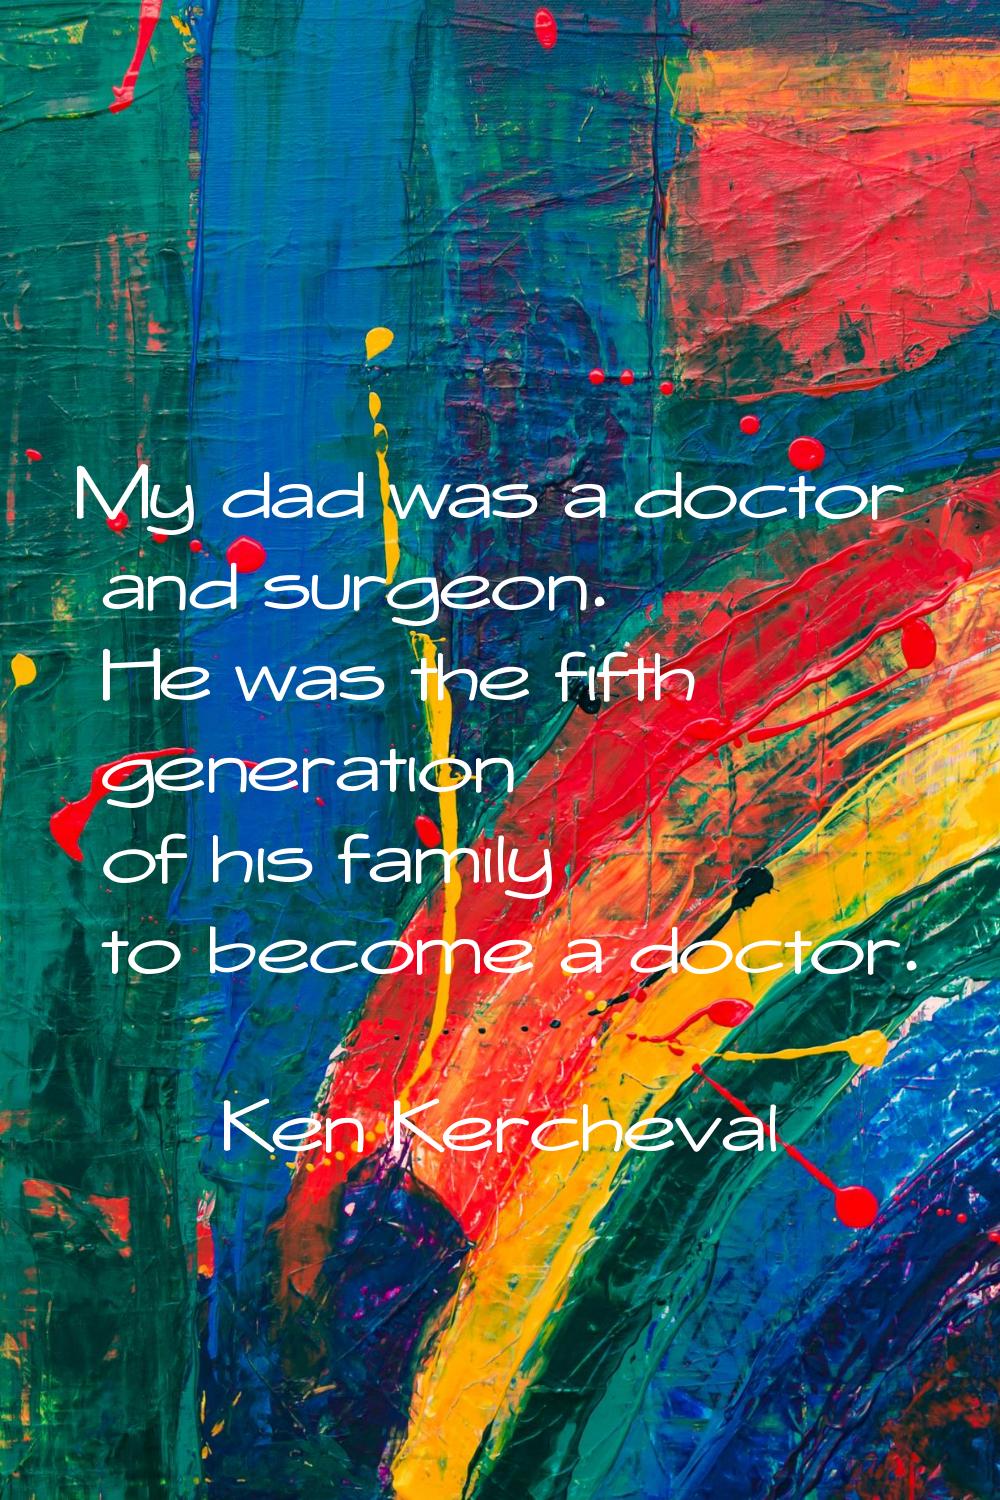 My dad was a doctor and surgeon. He was the fifth generation of his family to become a doctor.